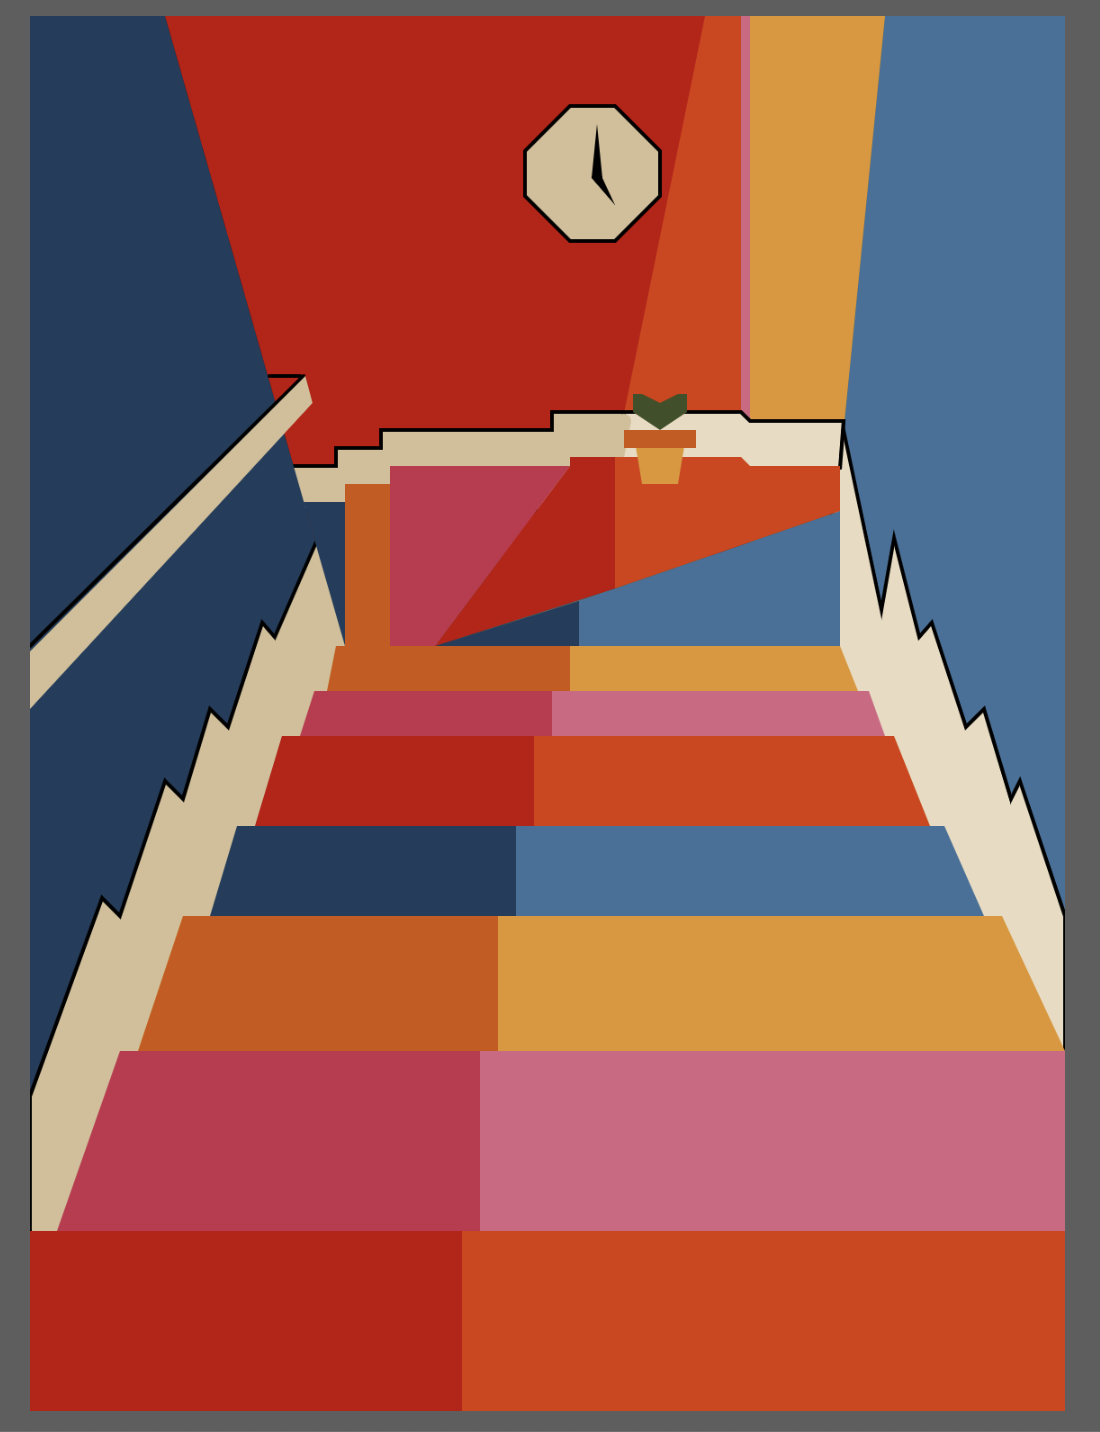 Red, blue, pink, and yellow stairs going down with dark blue walls on the sides, a clock on the red and yellow wall in front, and a yellow flower pot at the bottom of the stairs.